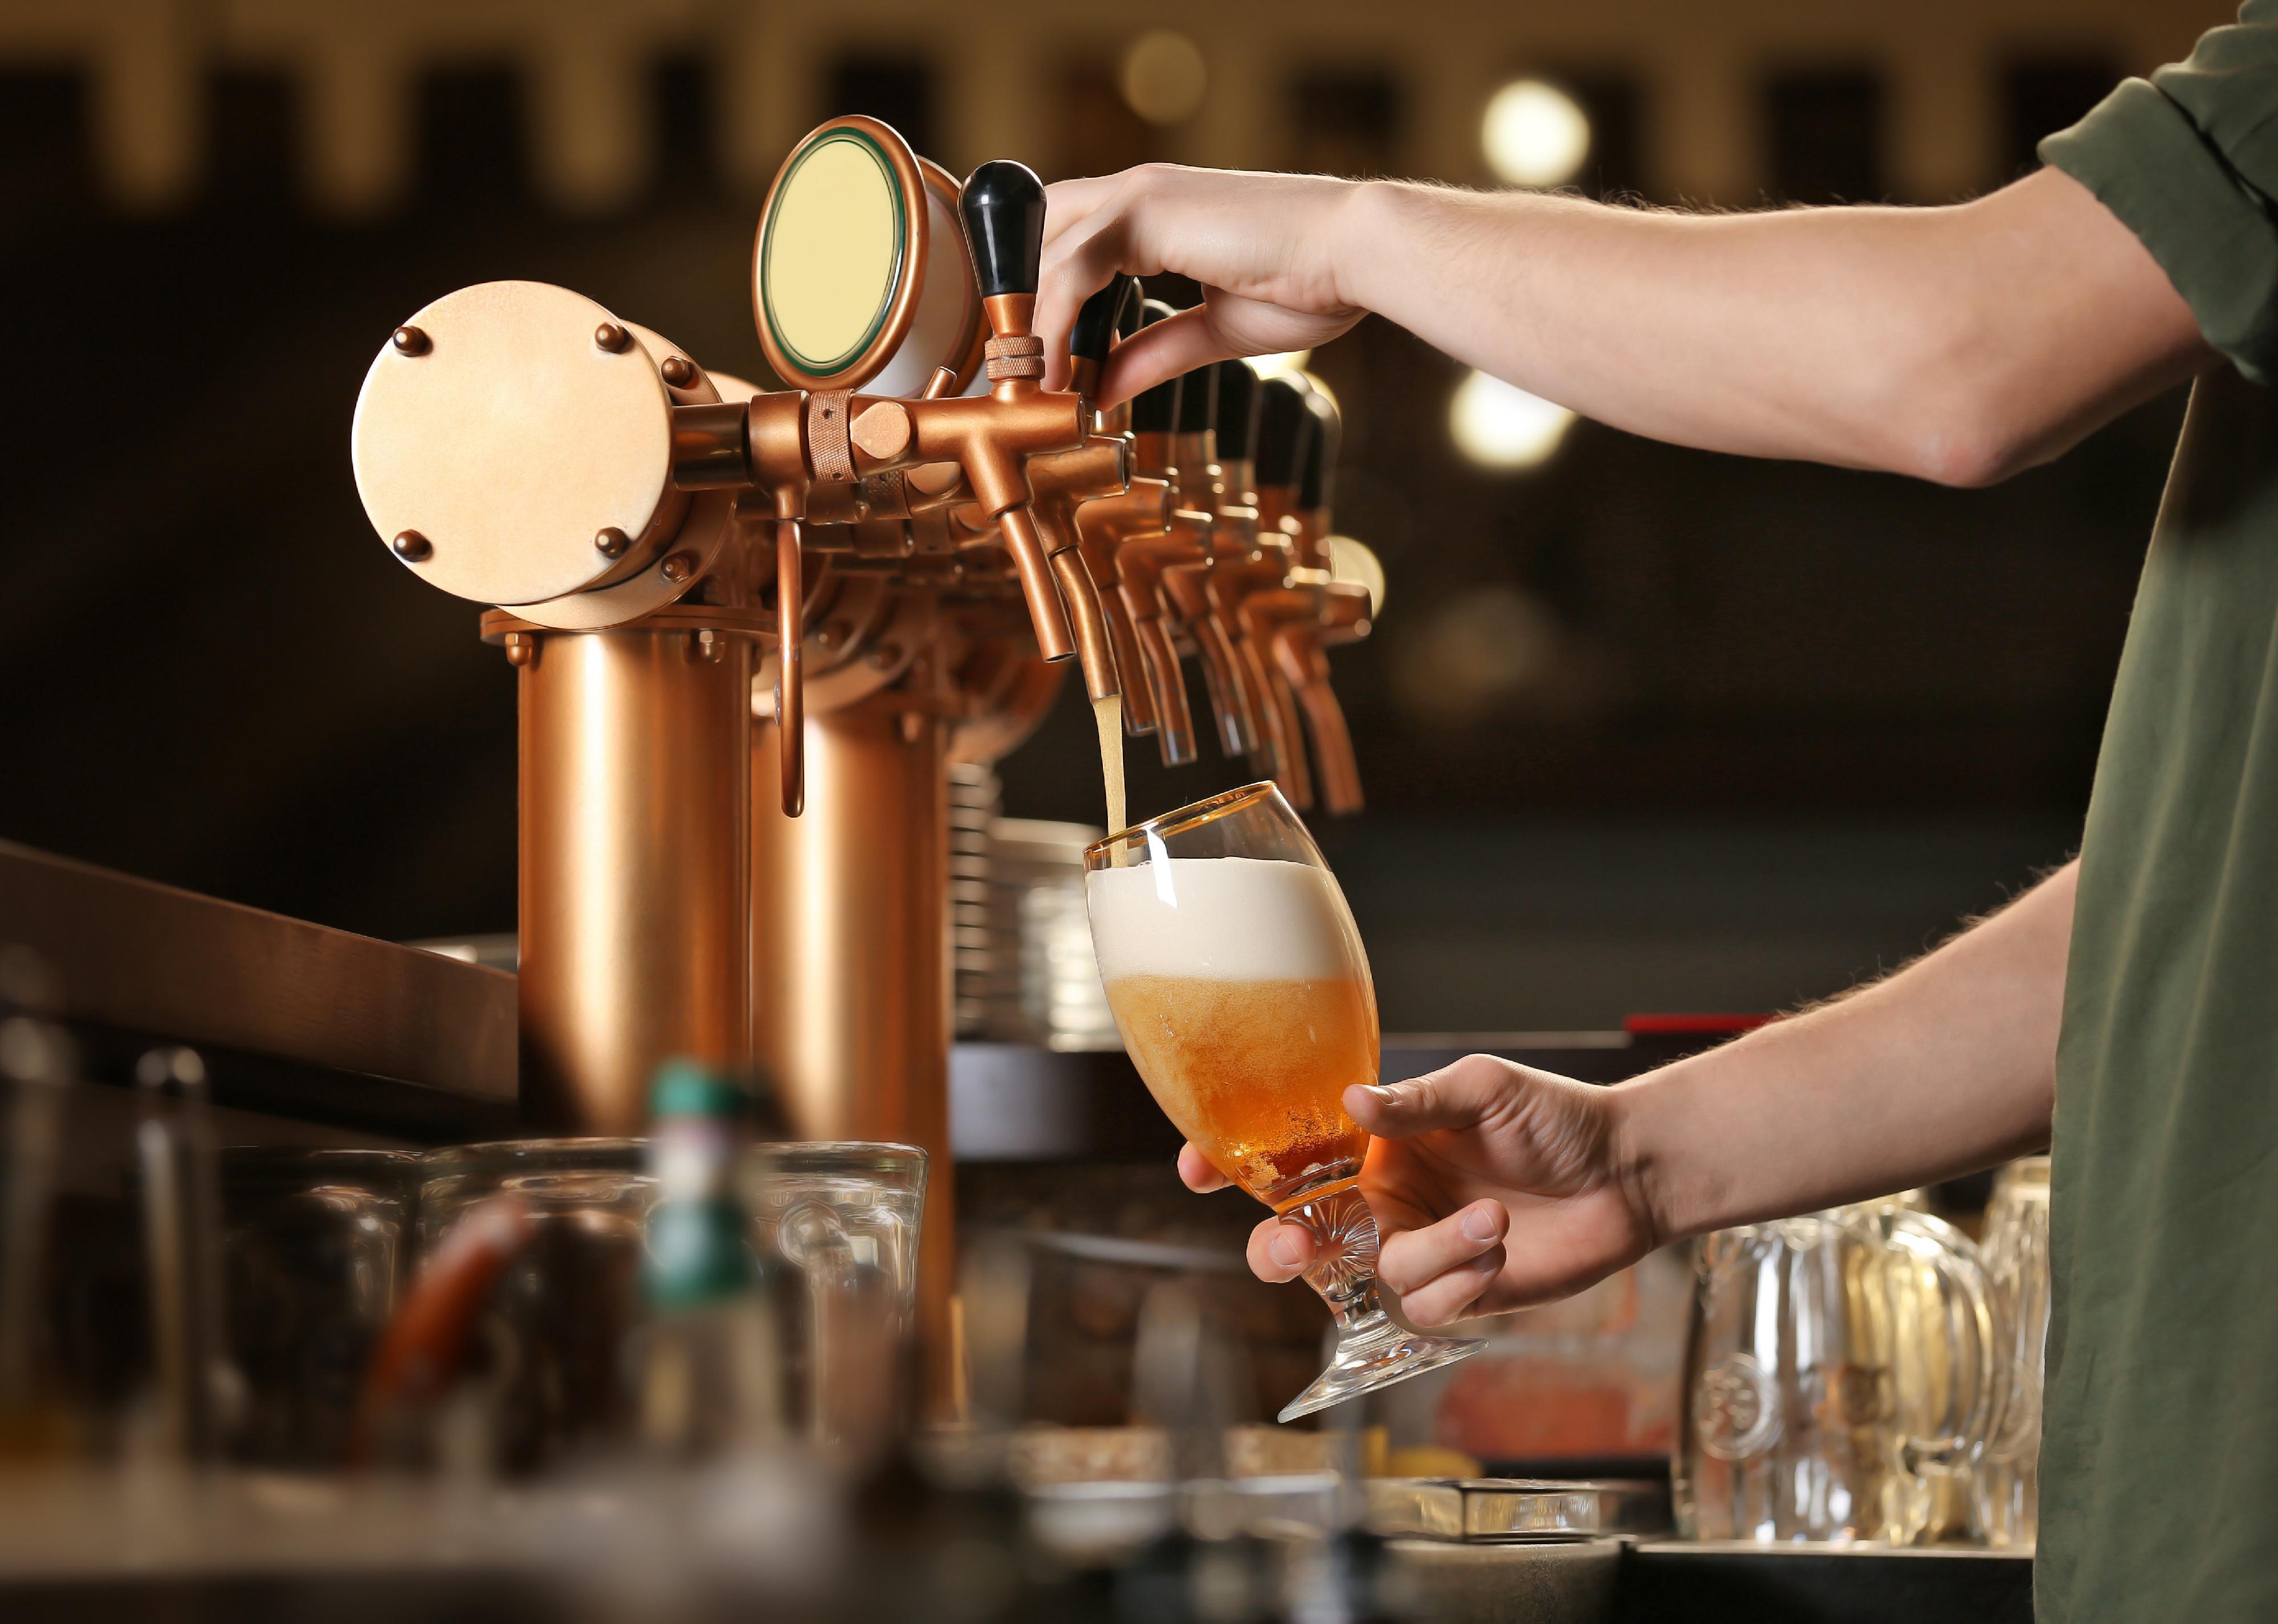 Barman hands pouring a lager beer in a glass